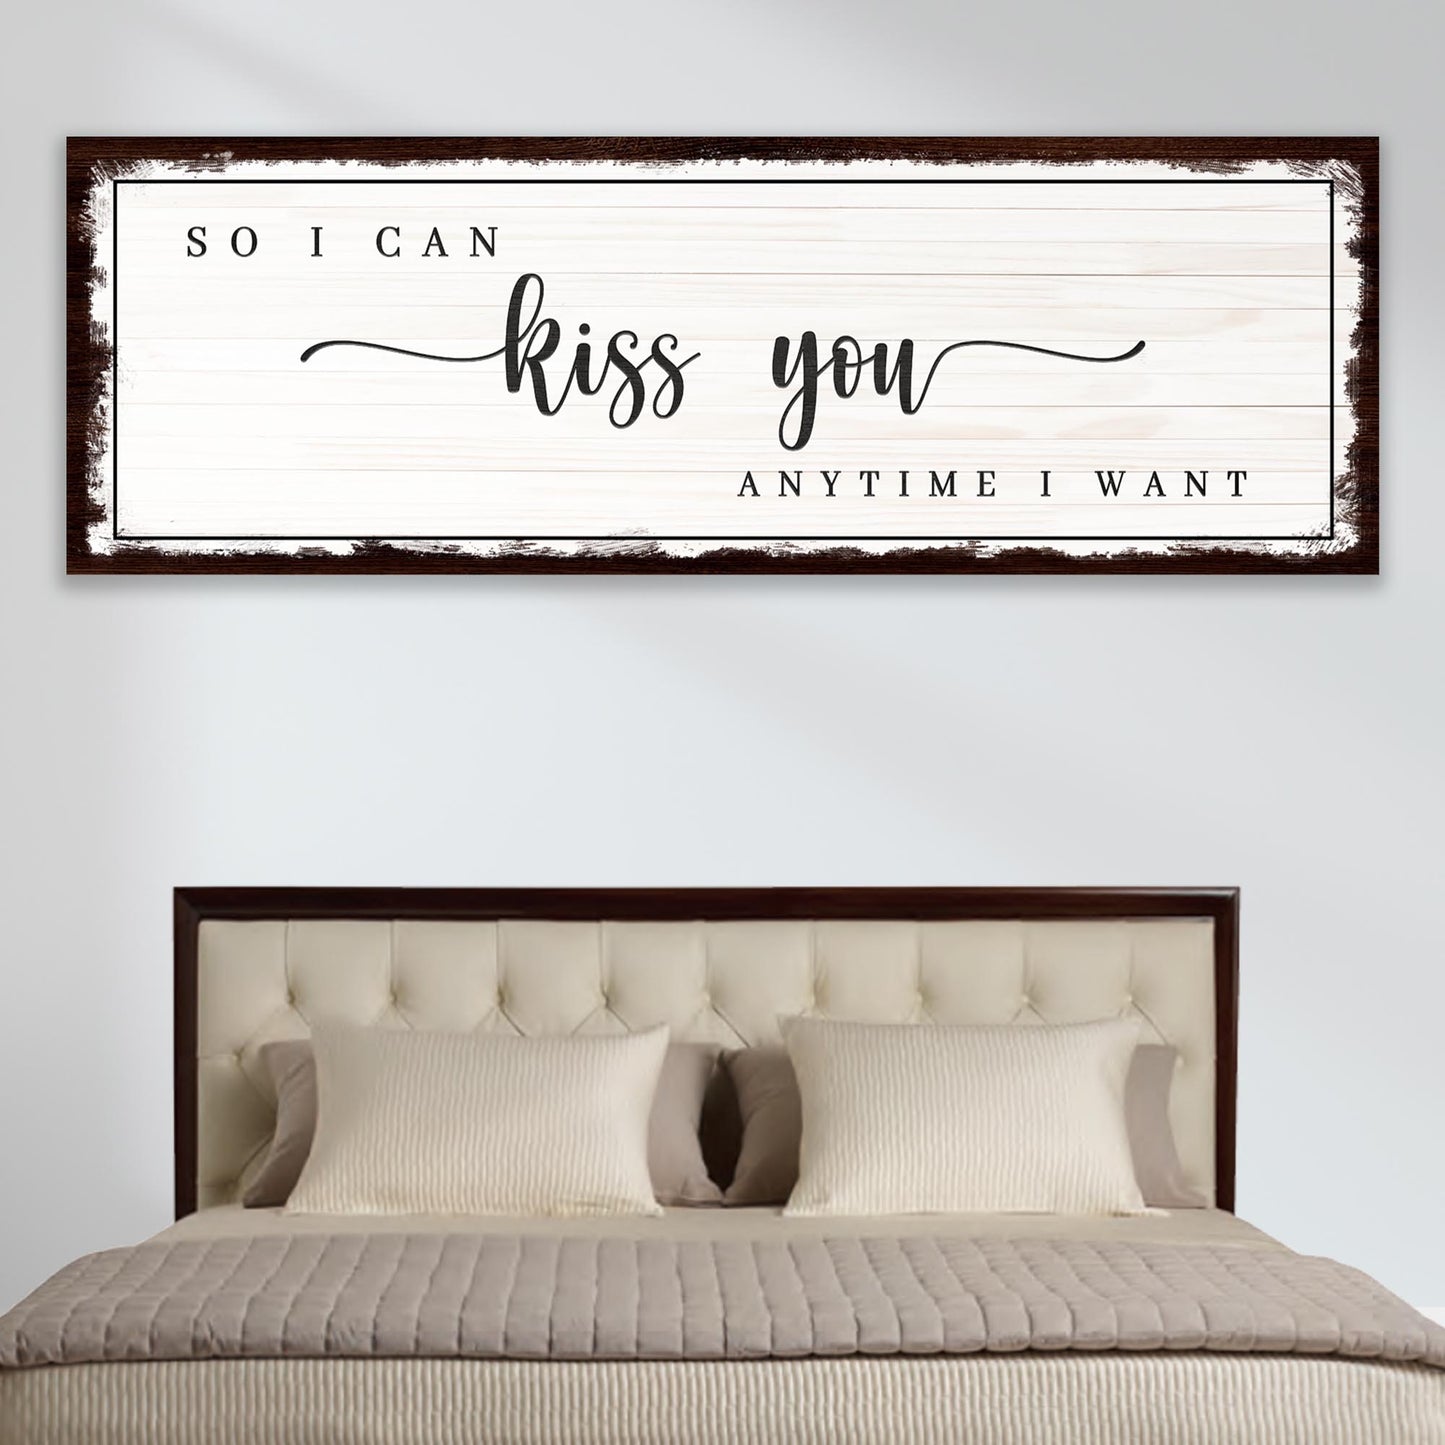 So I Can Kiss You Anytime I Want Sign III  - Image by Tailored Canvases